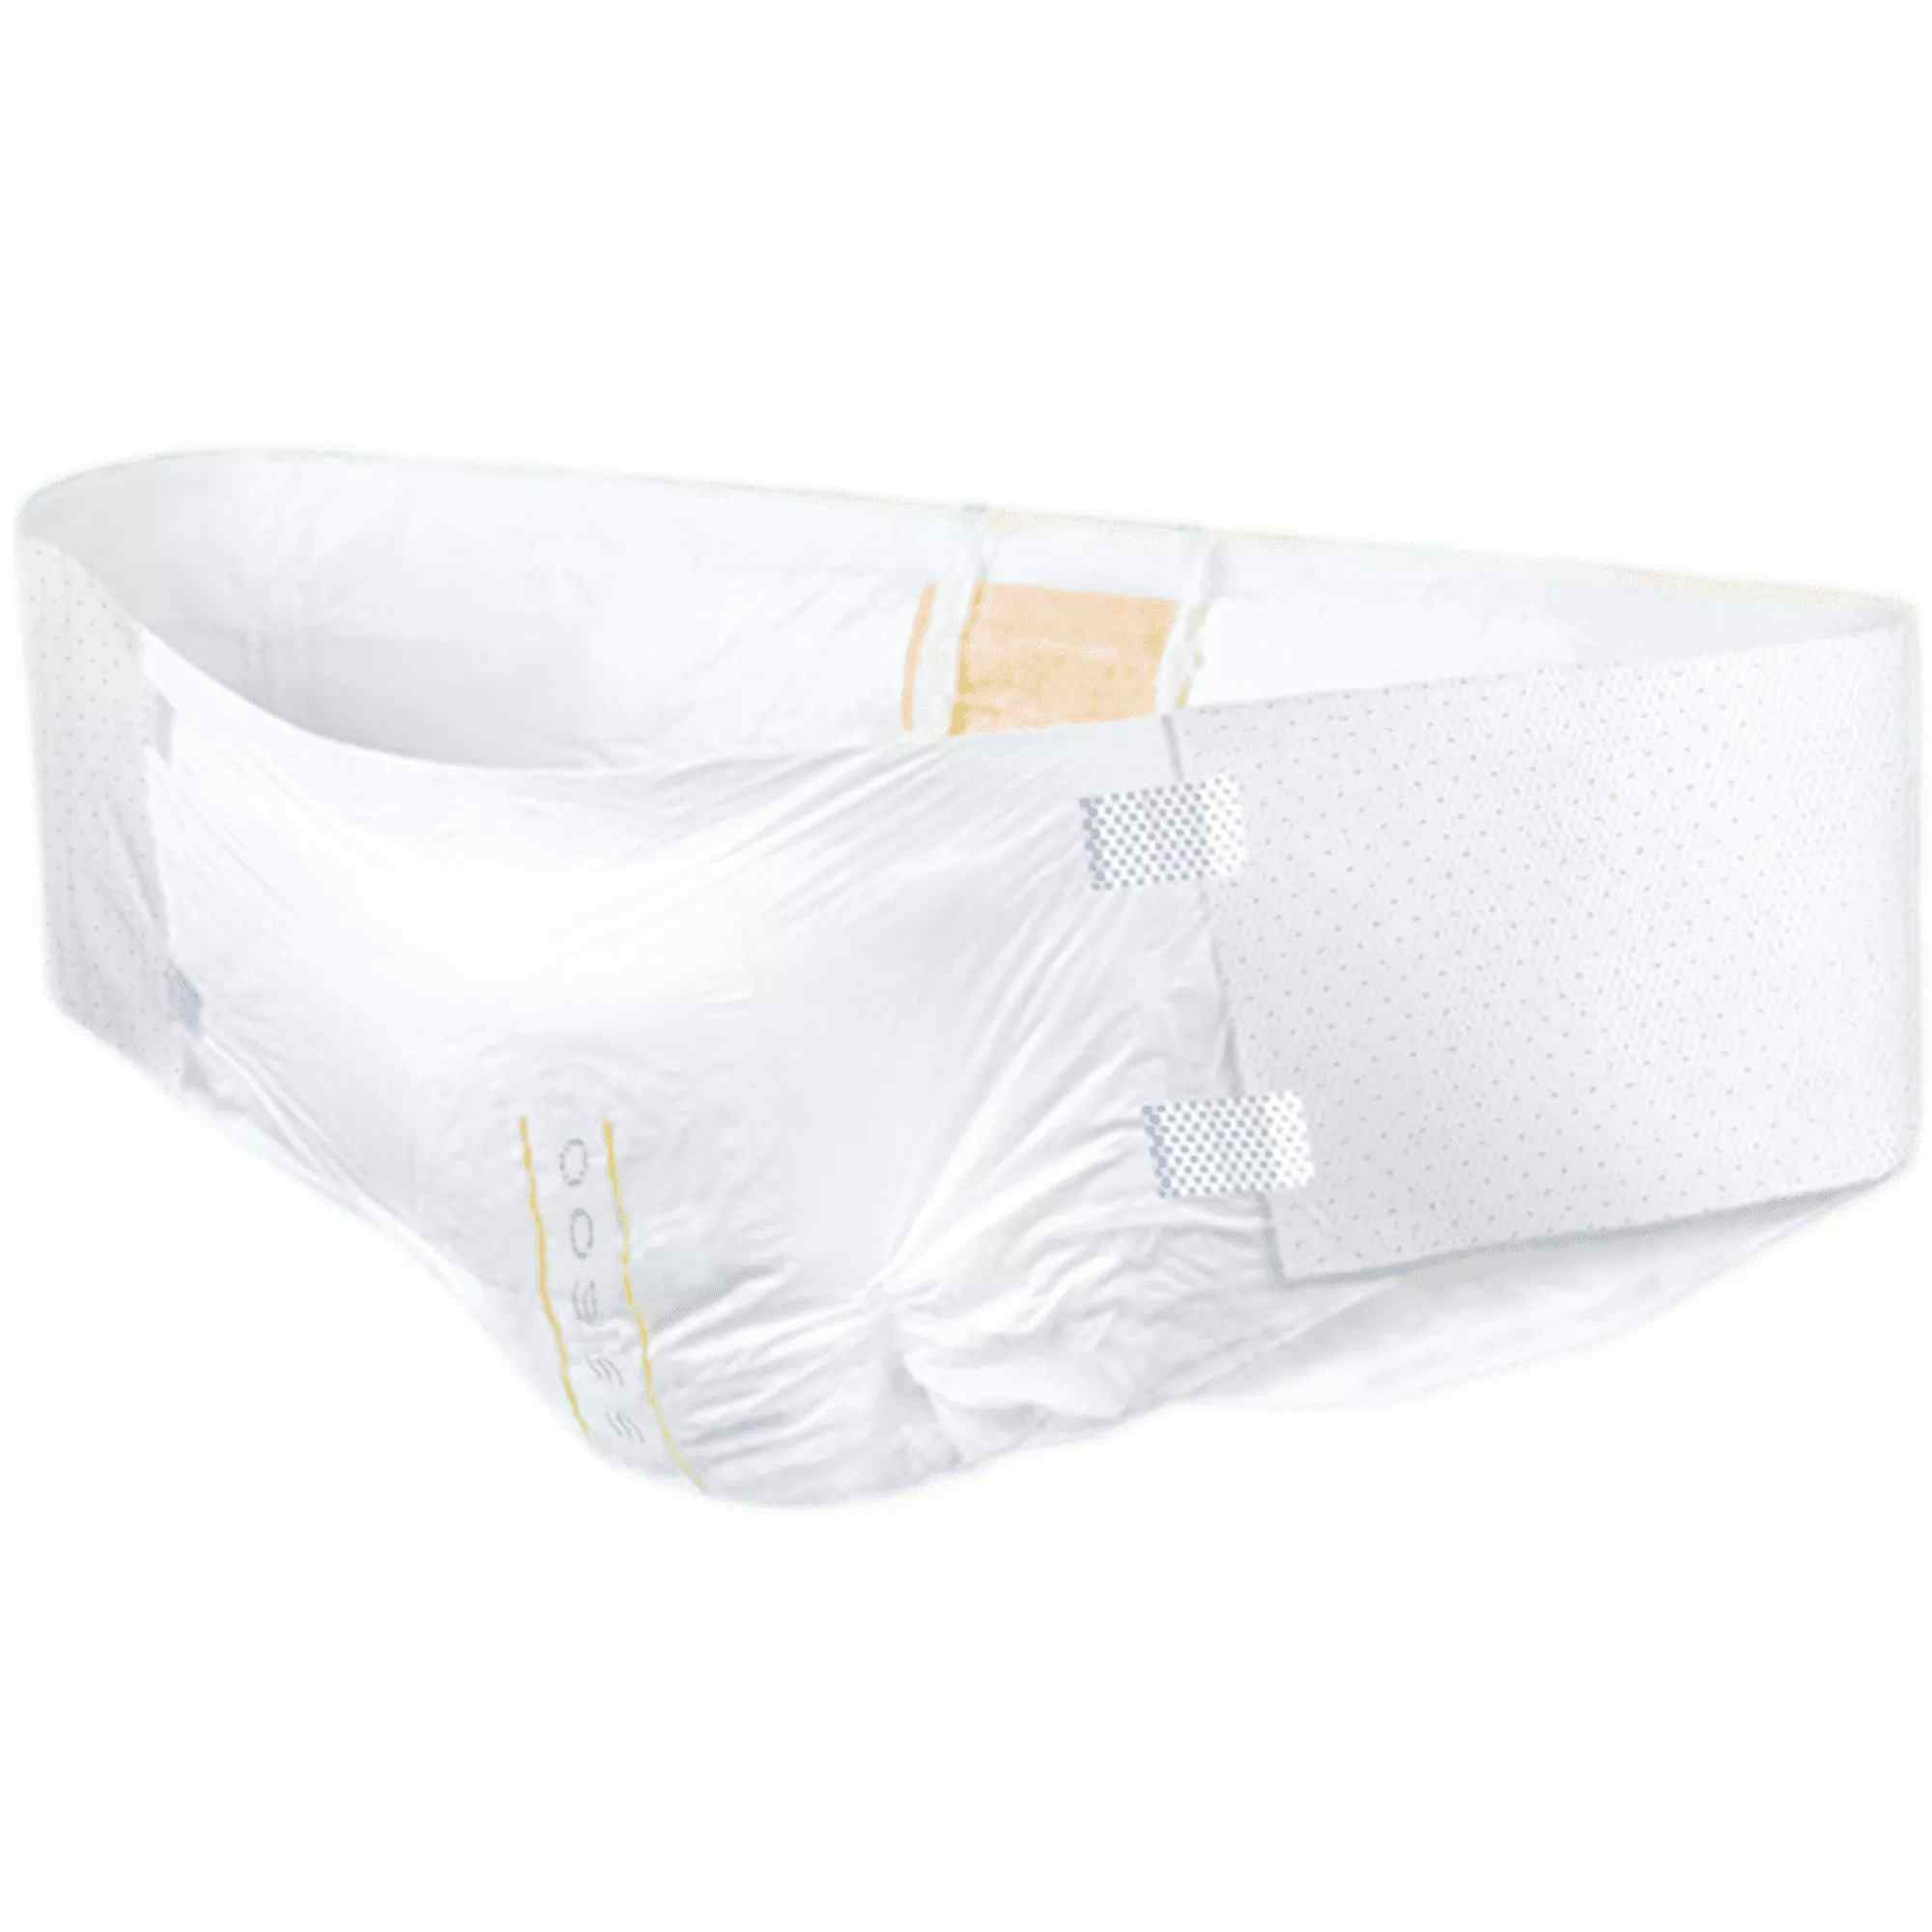 Tranquility Air-Plus Bariatric Disposable Adult Diapers with Tabs, Maximum, Front